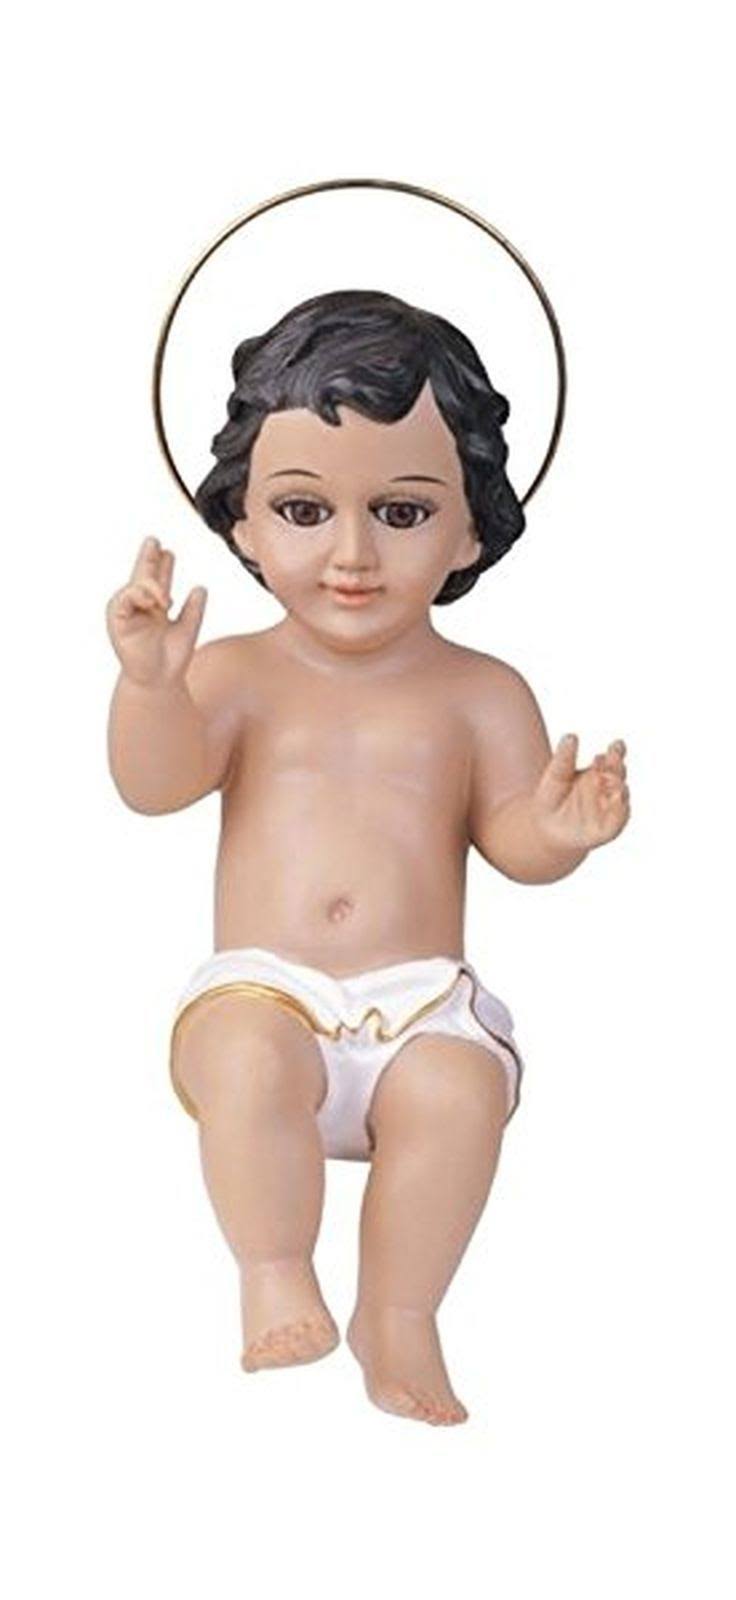 Stealstreet Baby Jesus with Glass Eyes Holy Religious Figurine Decoration 16"